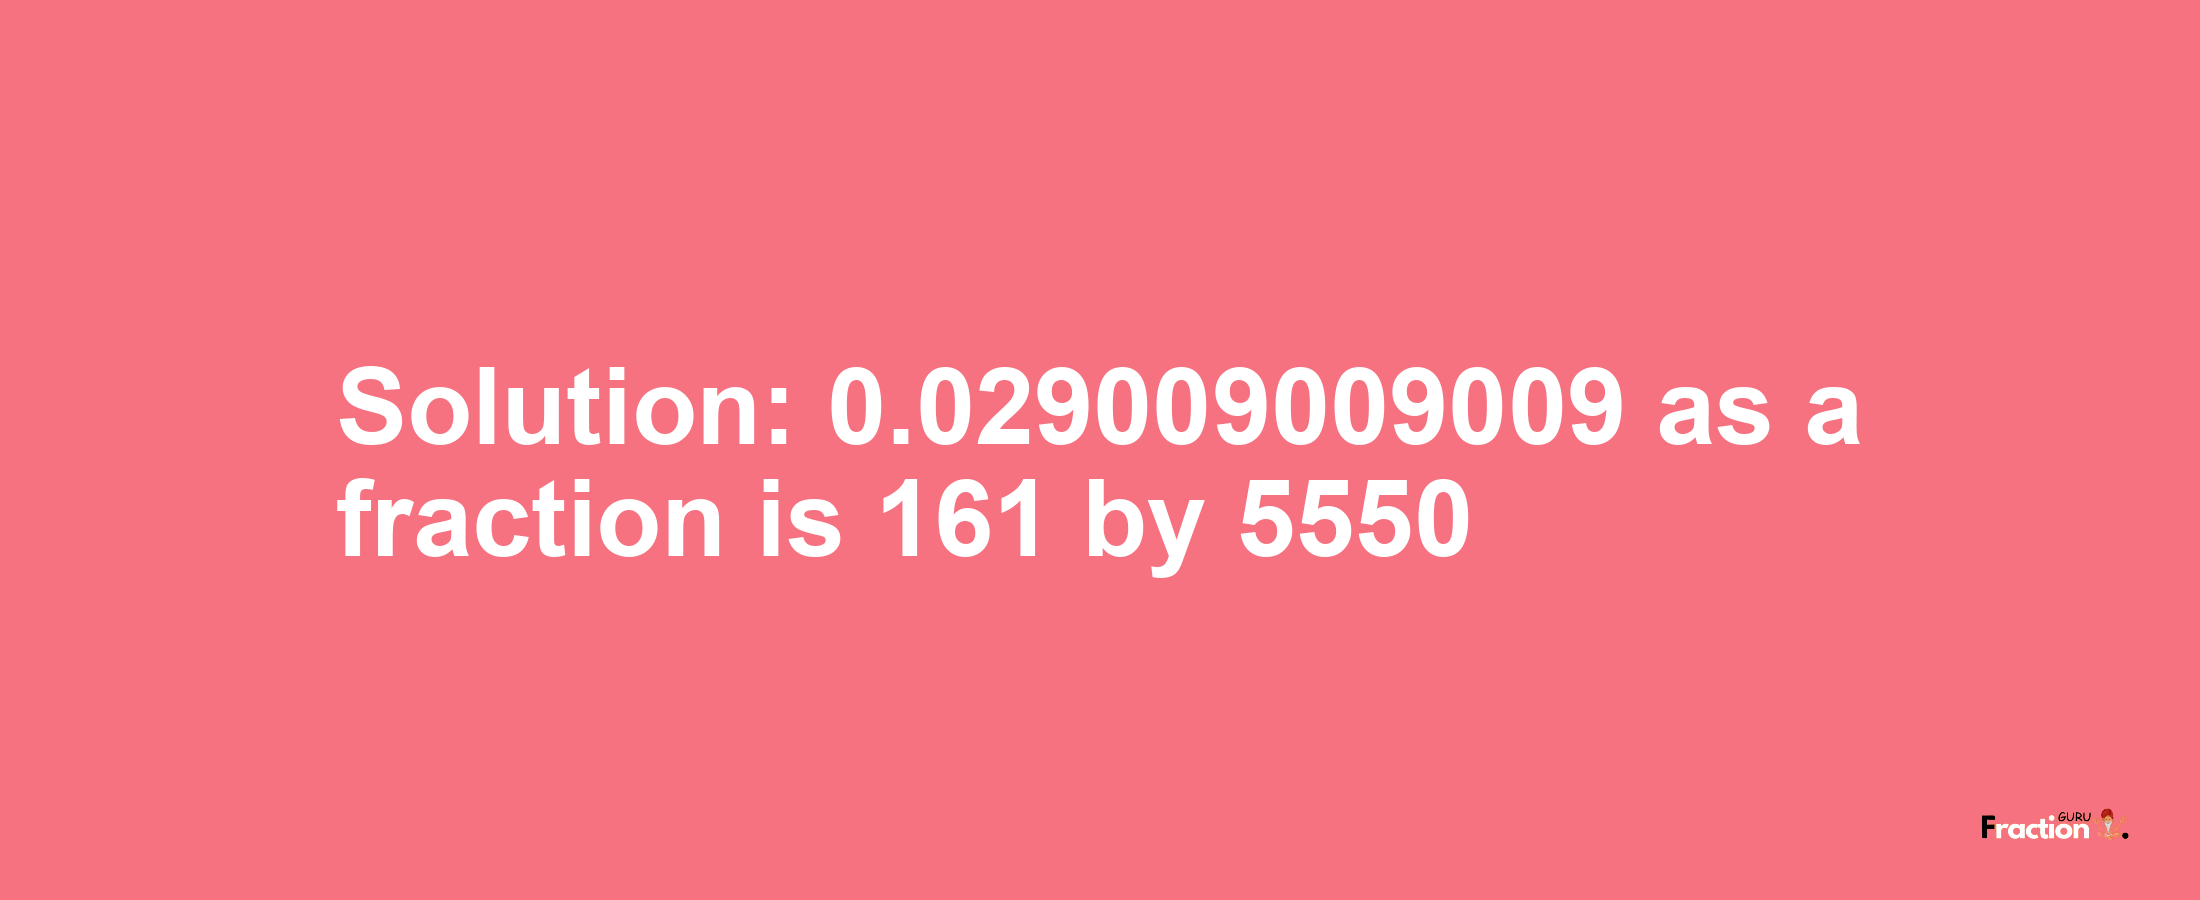 Solution:0.029009009009 as a fraction is 161/5550